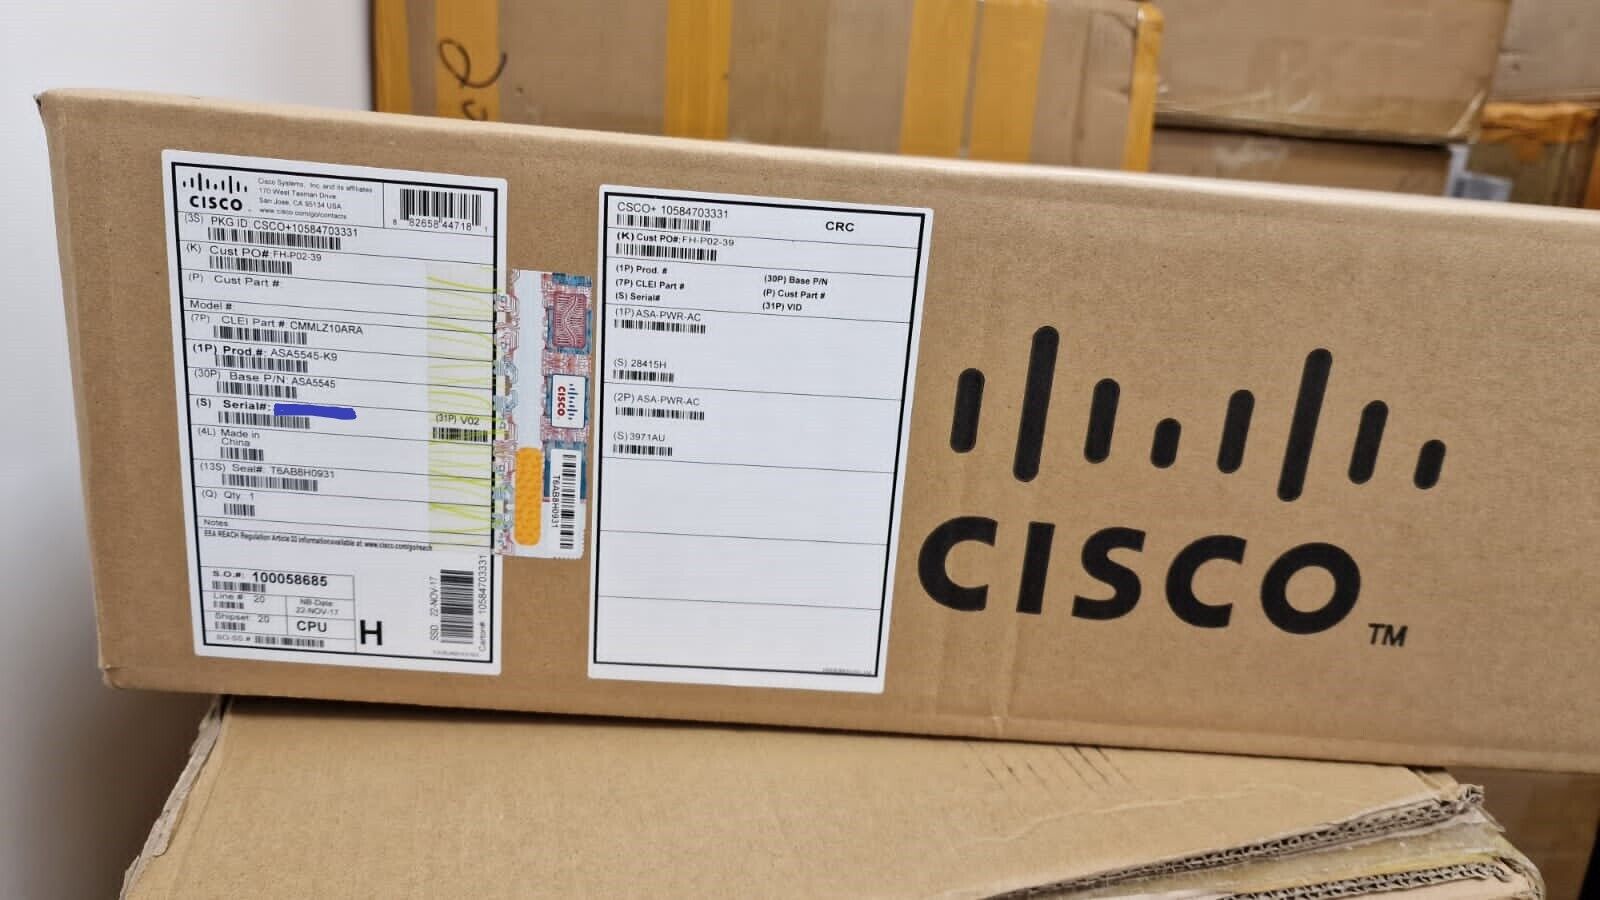 CISCO ASA5545-K9 FIREWALL EDITION - SECURITY APPLIANCE 6x AVAILABLE  IN STOCK